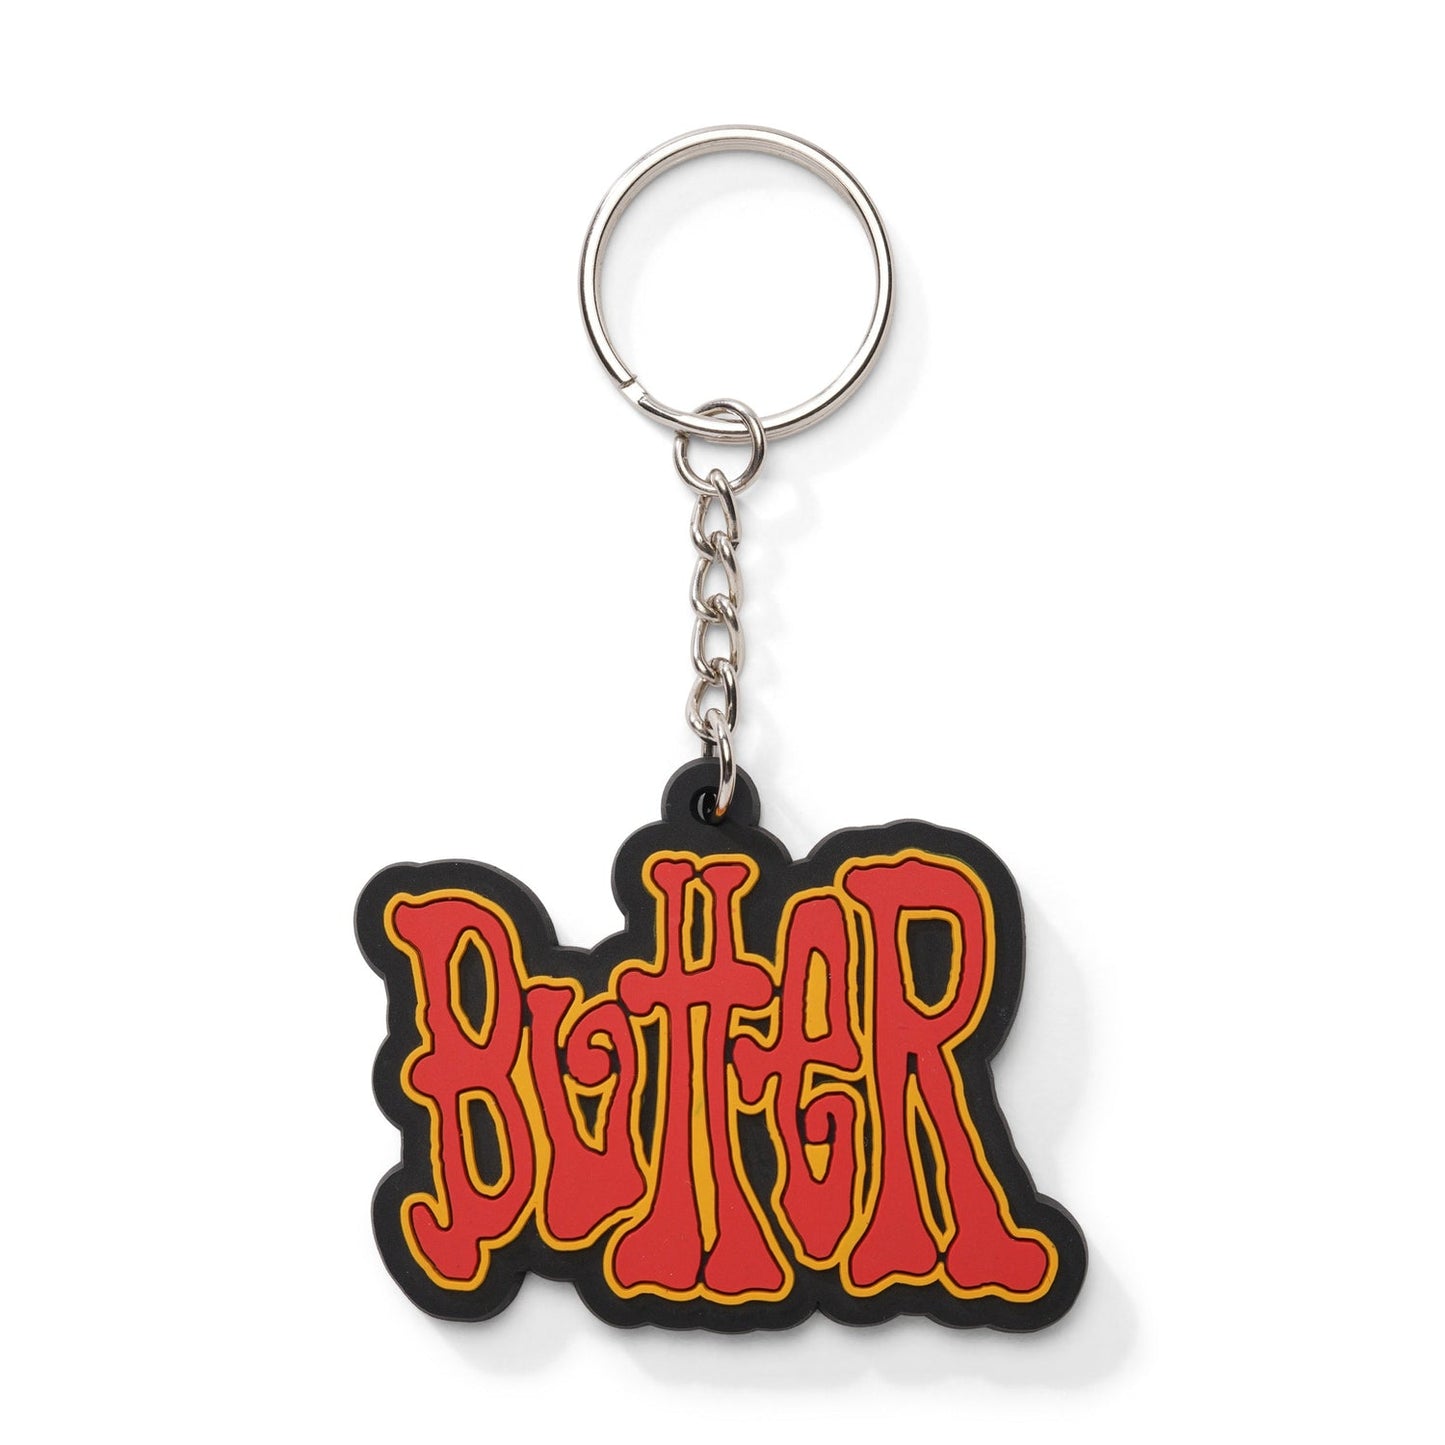 Tour Rubber Key Chain - Red / Yellow